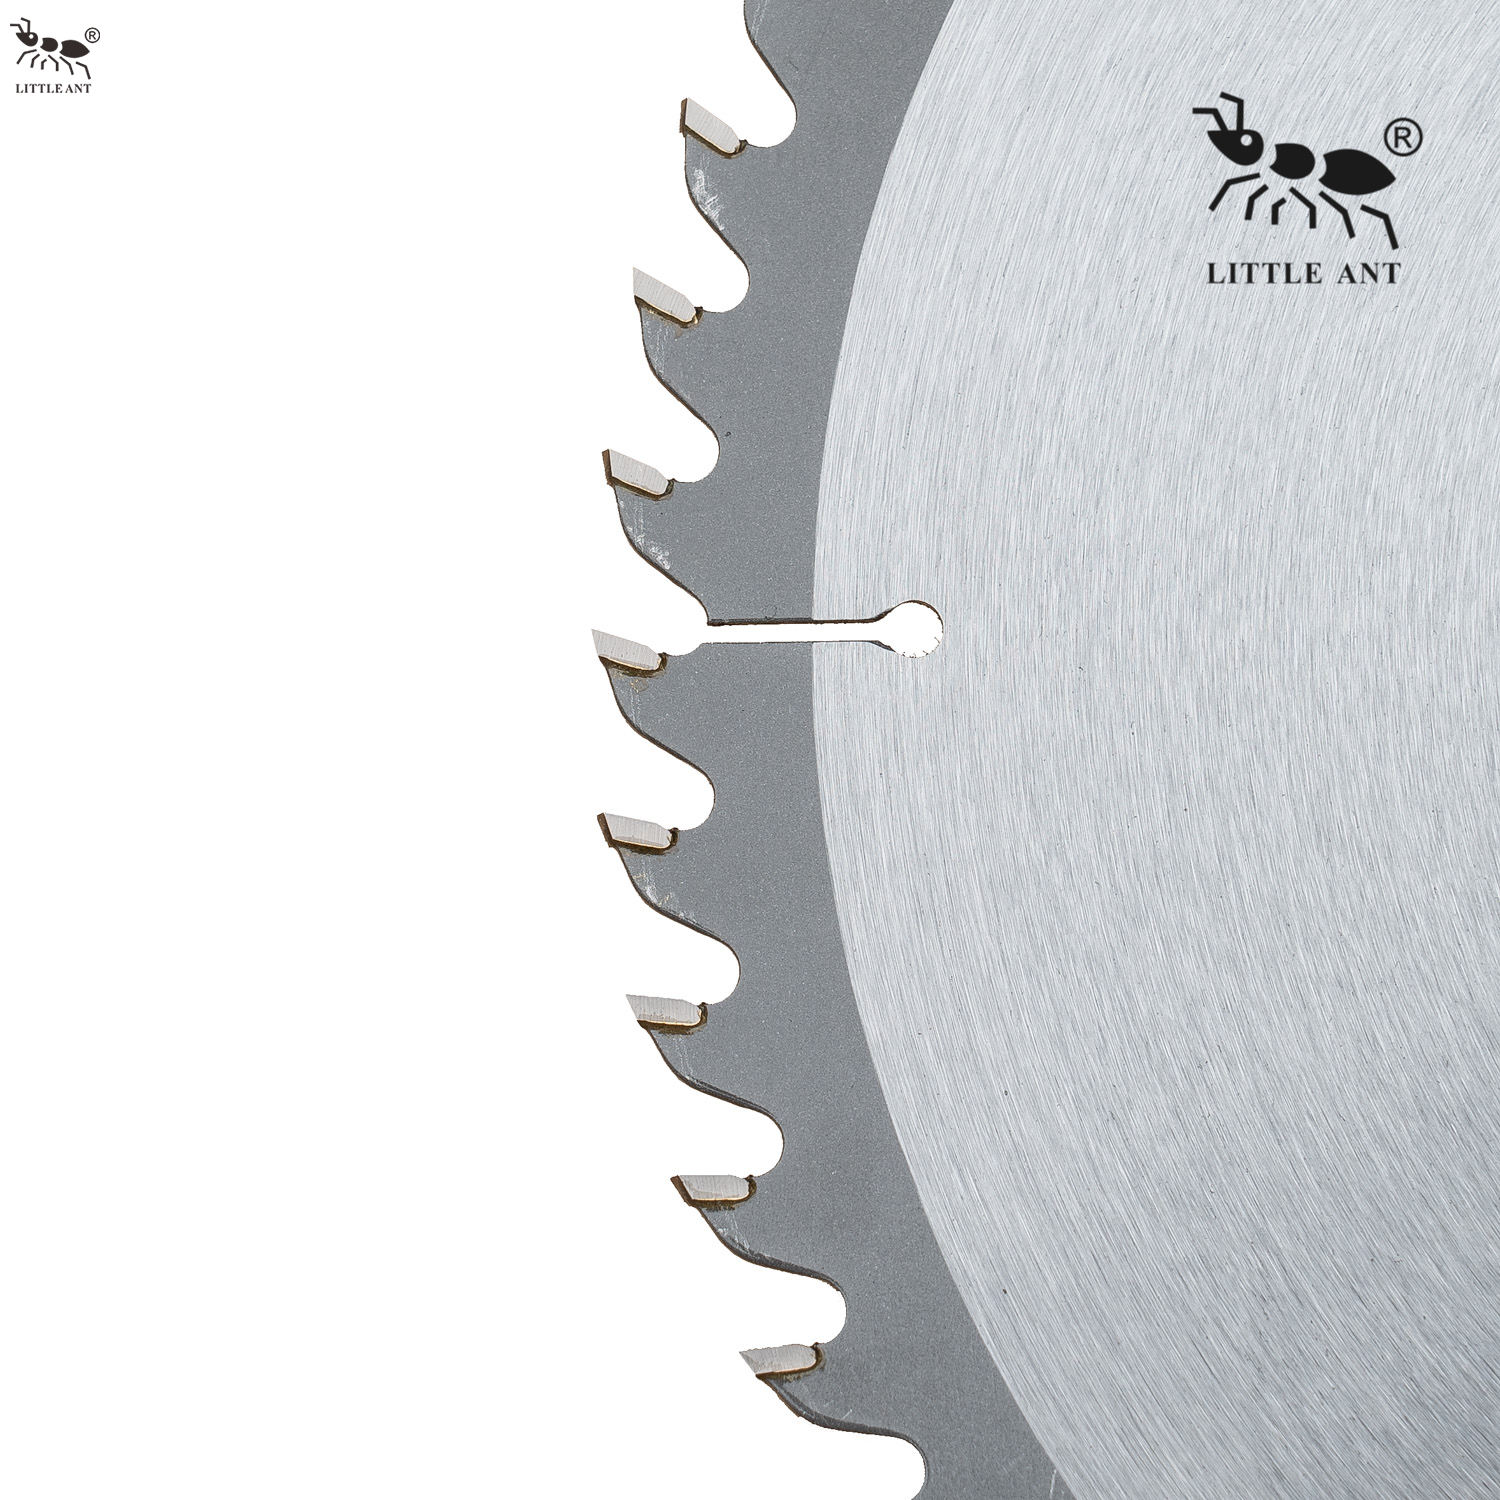 LITTLE ANT 65mn Steel Lithium Electric Saw Special Silent Industrial TCT Blade Tungsten Alloy Wood Sawing Disc 